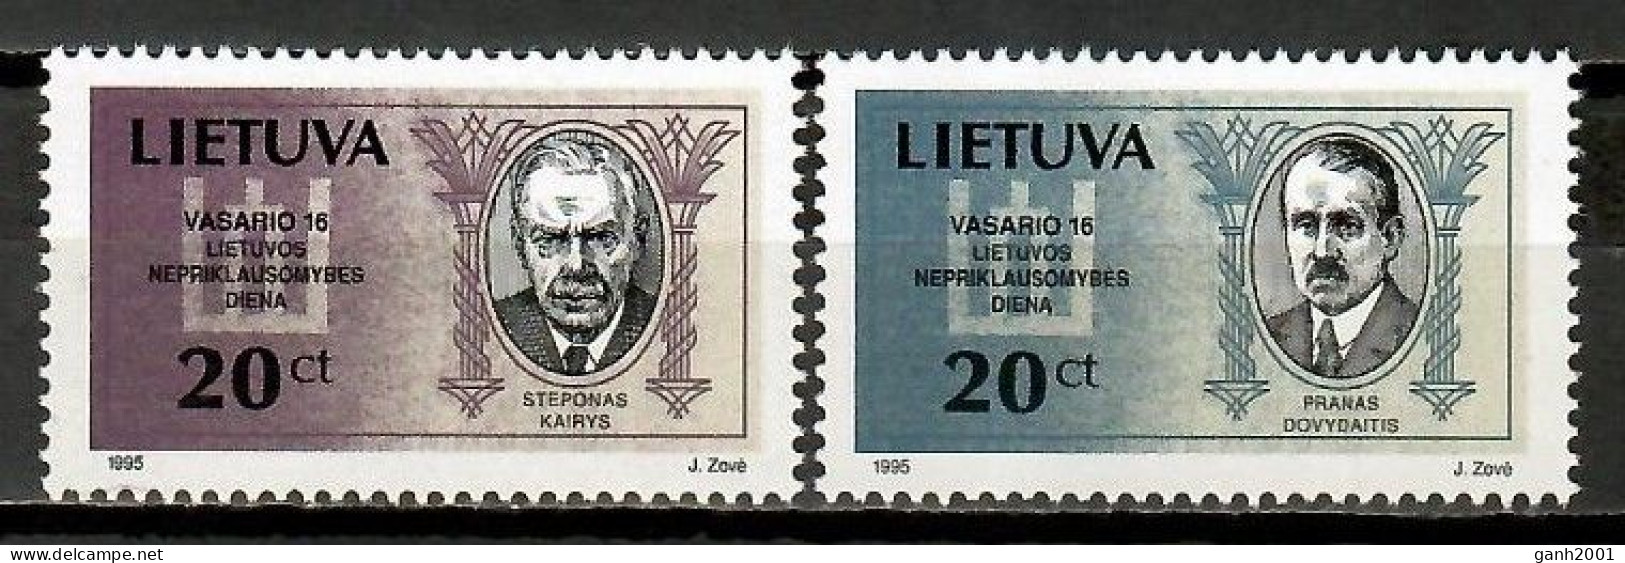 Lithuania 1995 Lituania / Independence Day Famous People Celebrities MNH Personajes Celebridades / Kd04  36-5 - Litauen